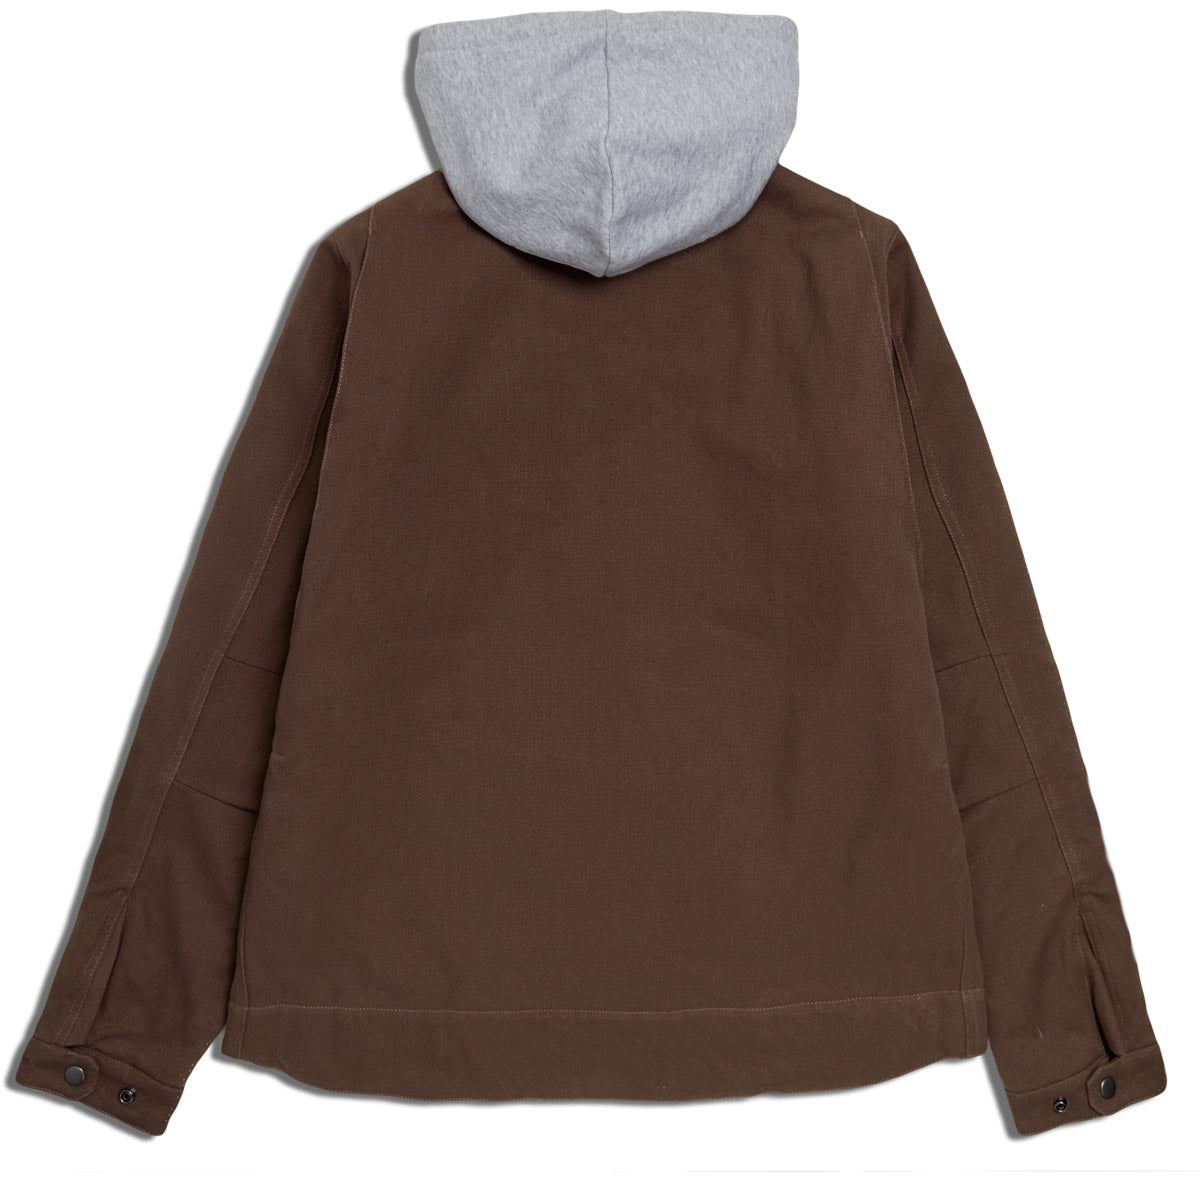 CCS Heavy Canvas Insulated Work Jacket - Brown image 4